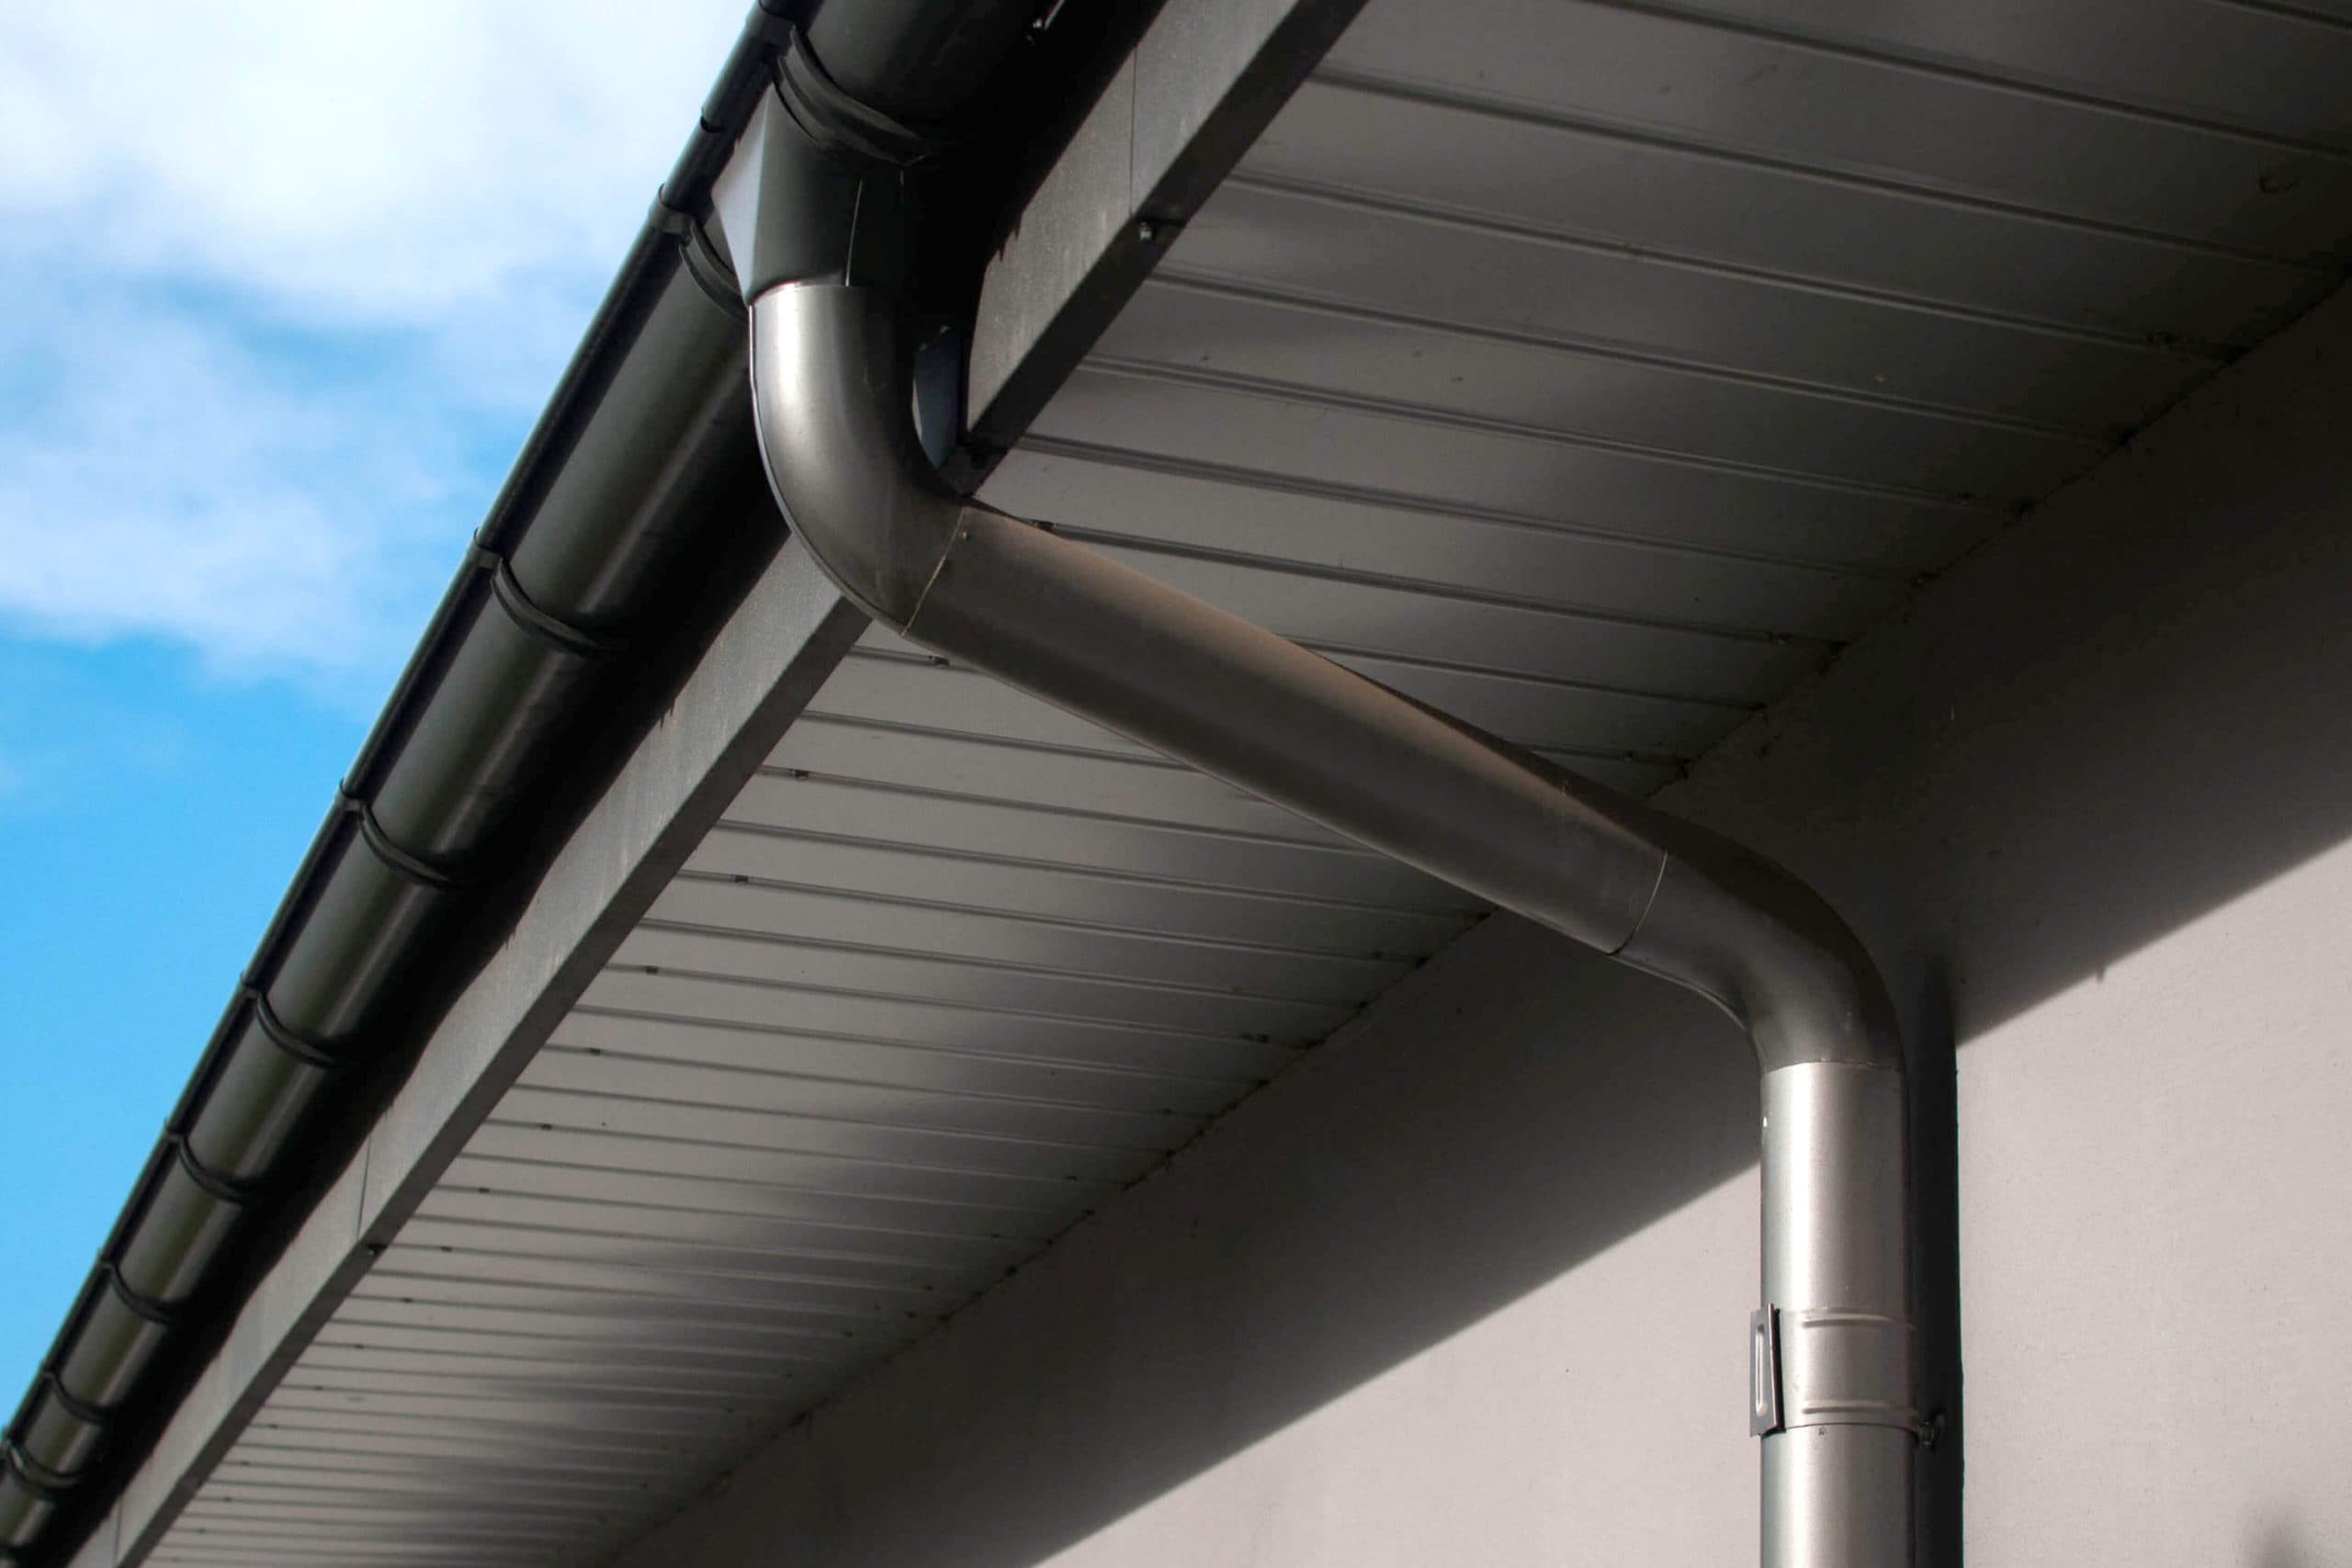 Reliable and affordable Galvanized gutters installation in Charlottesville